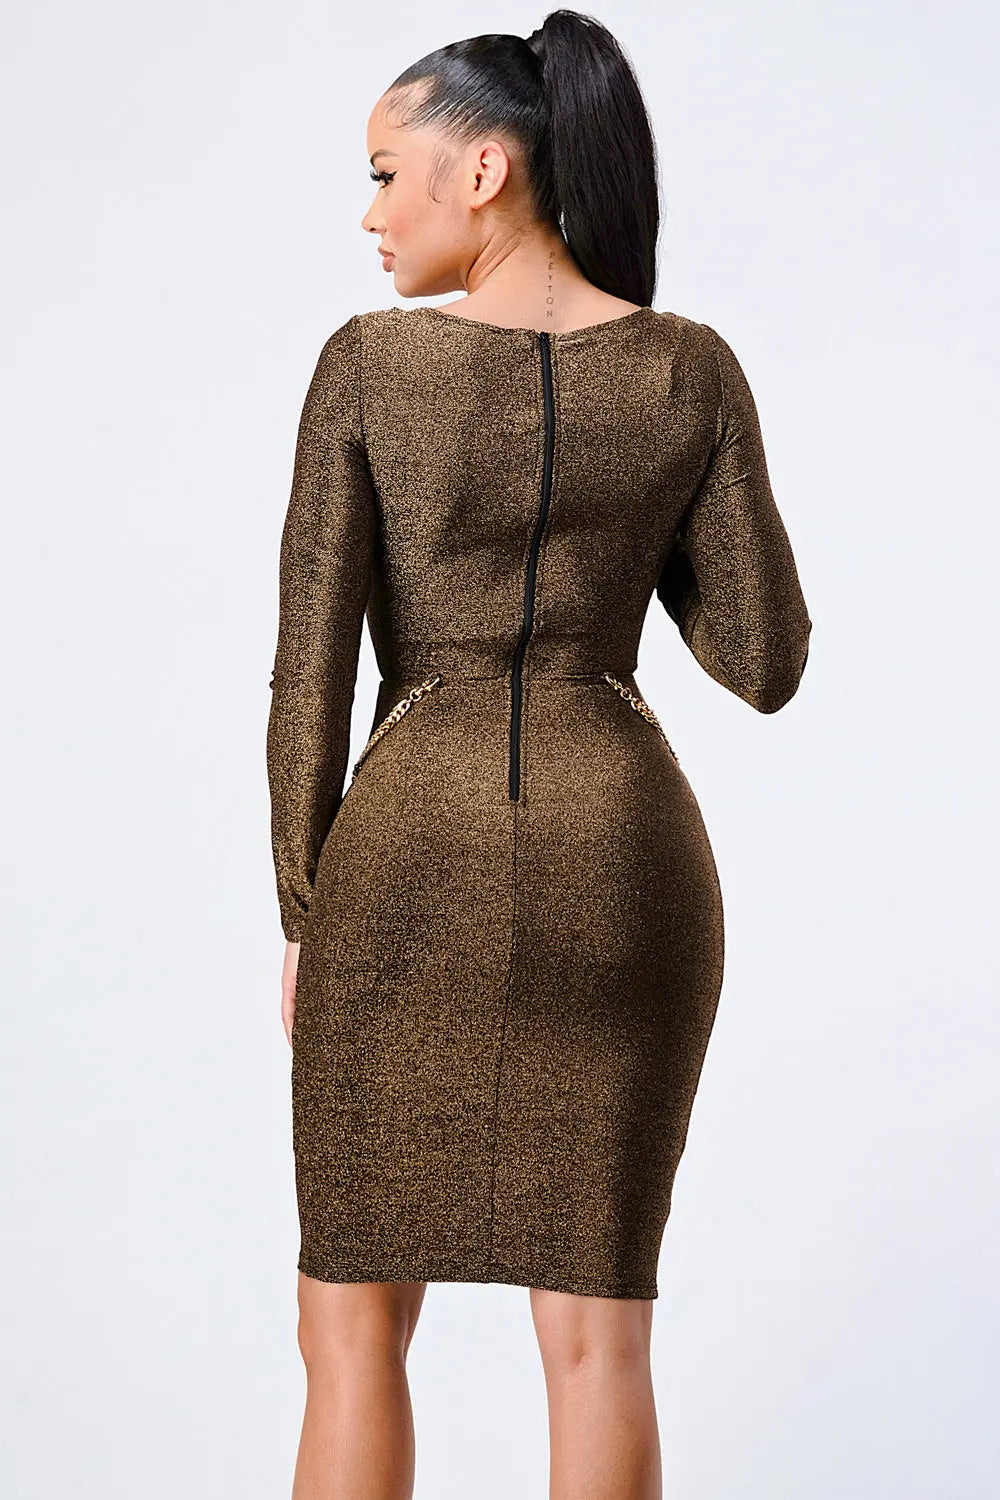 Luxe Waist Gold Chain Cut-out Detail Square Neck Glitter Bodycon Dress Sunny EvE Fashion